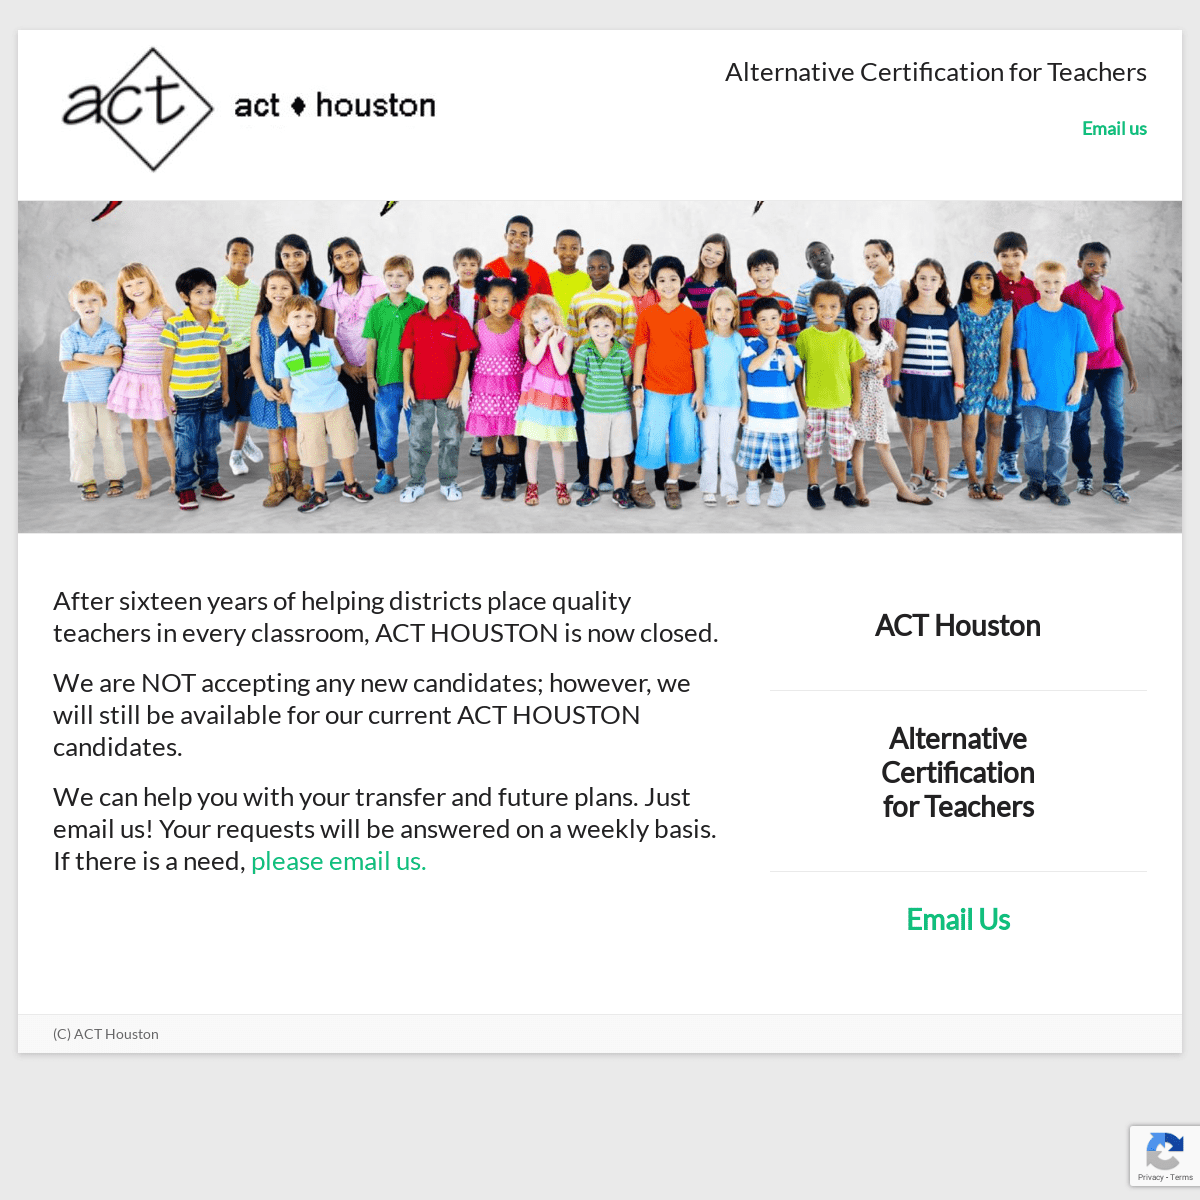 A complete backup of acthouston.com